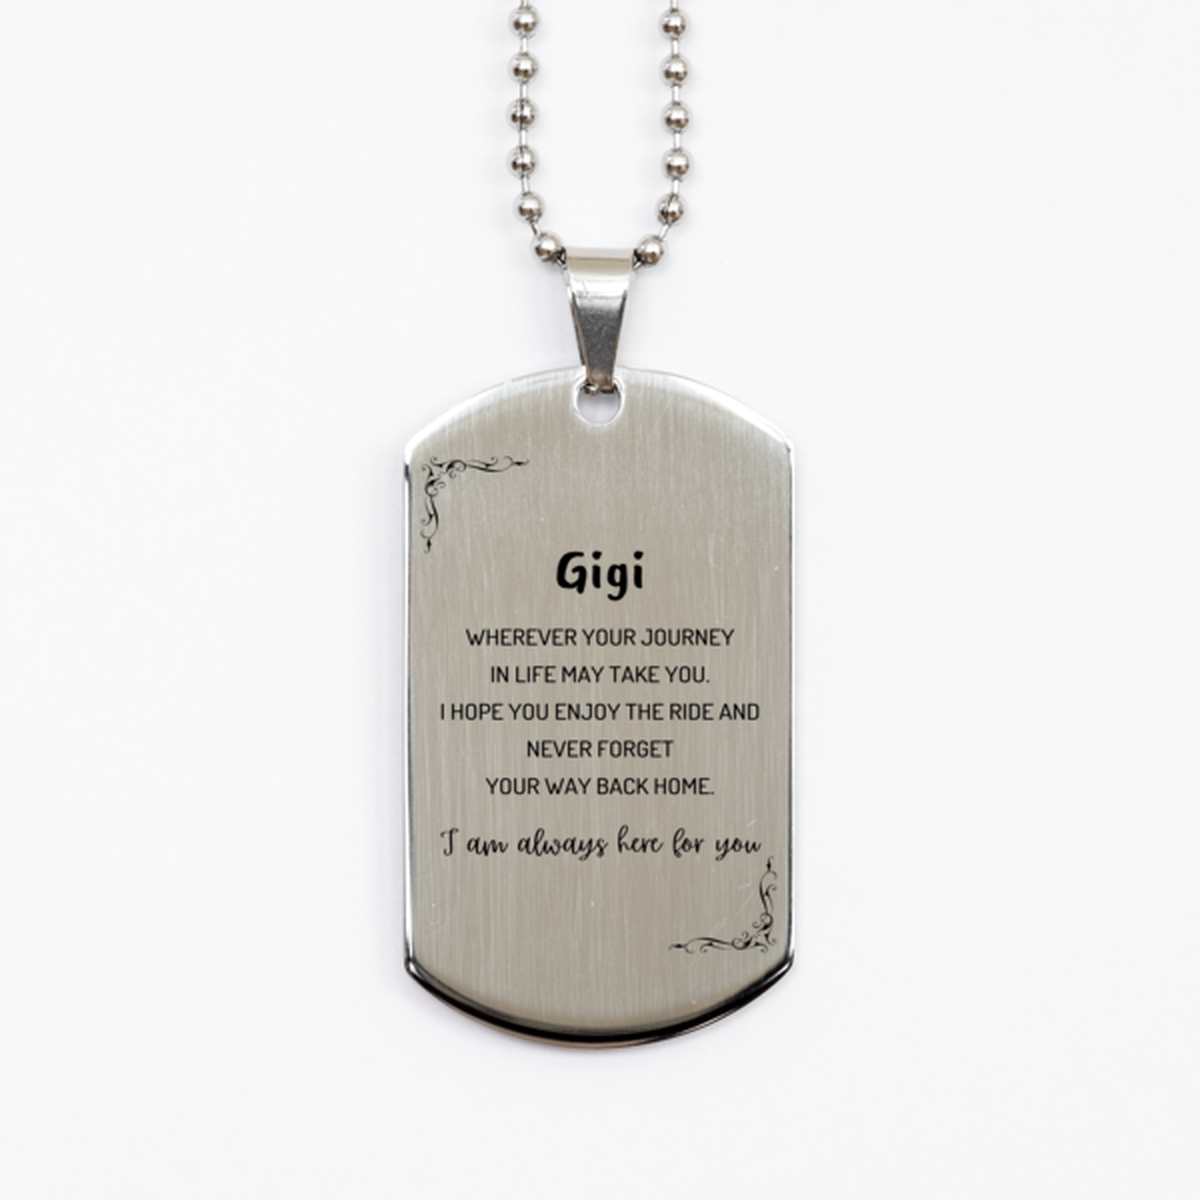 Gigi wherever your journey in life may take you, I am always here for you Gigi Silver Dog Tag, Awesome Christmas Gifts For Gigi, Gigi Birthday Gifts for Men Women Family Loved One